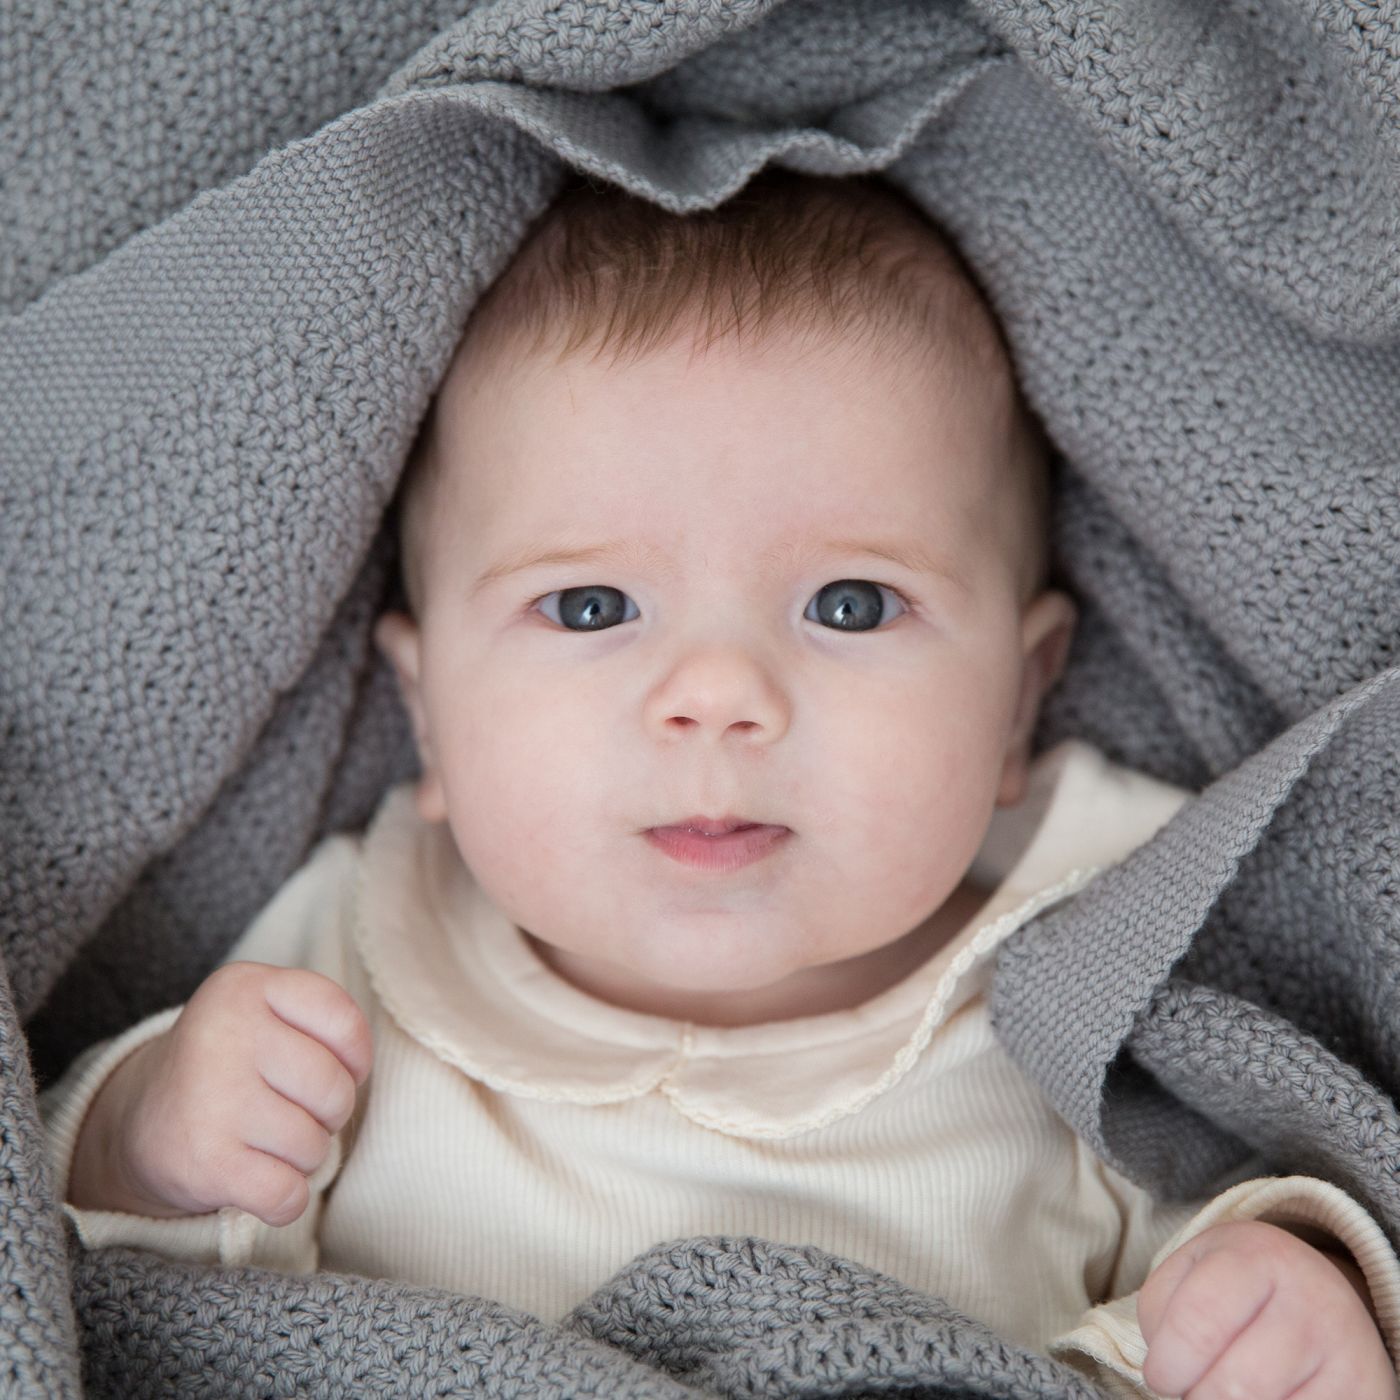 A baby wrapped in a grey cellular baby blanket.